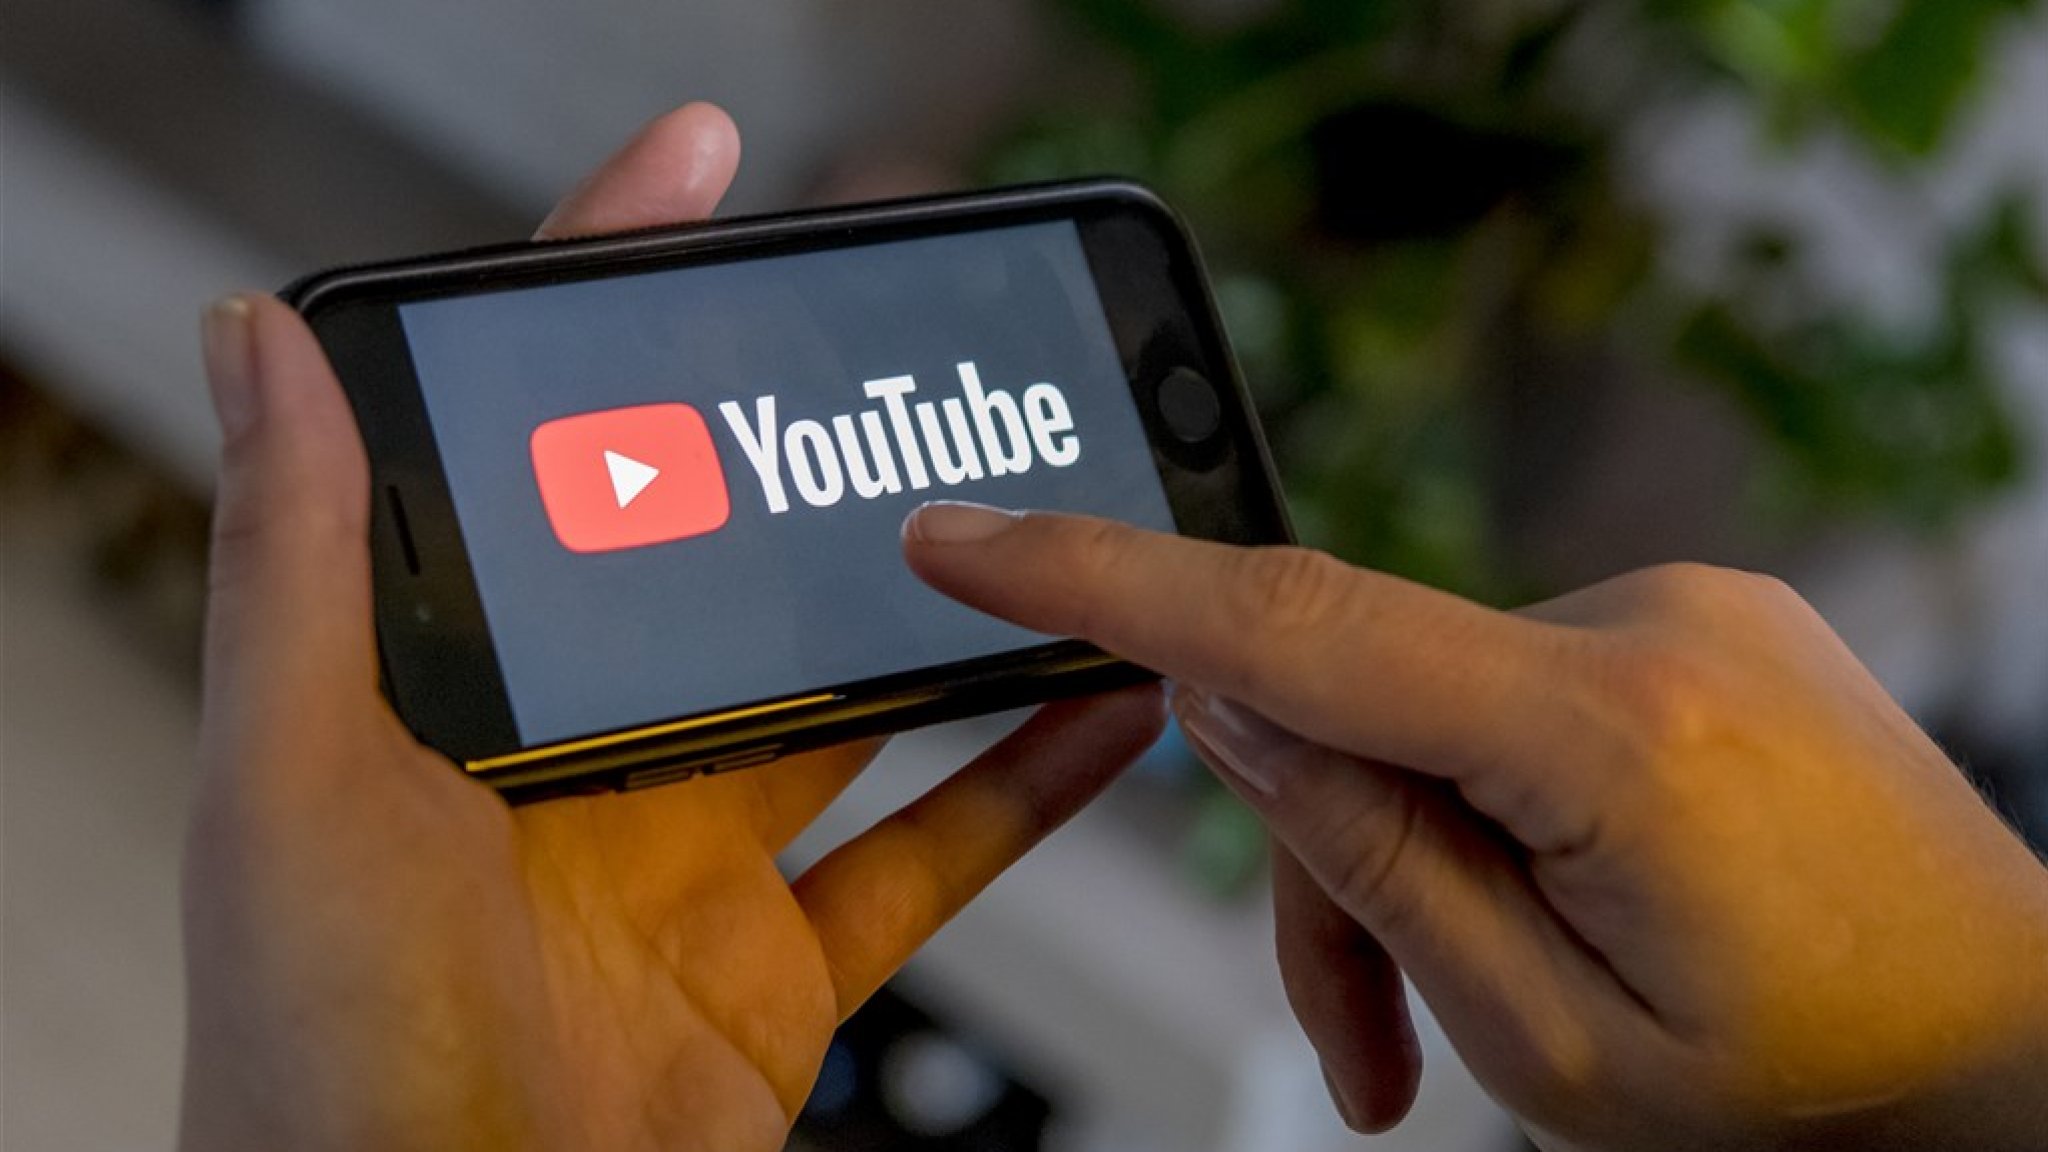 US police officer violating copyright system to stay away from YouTube